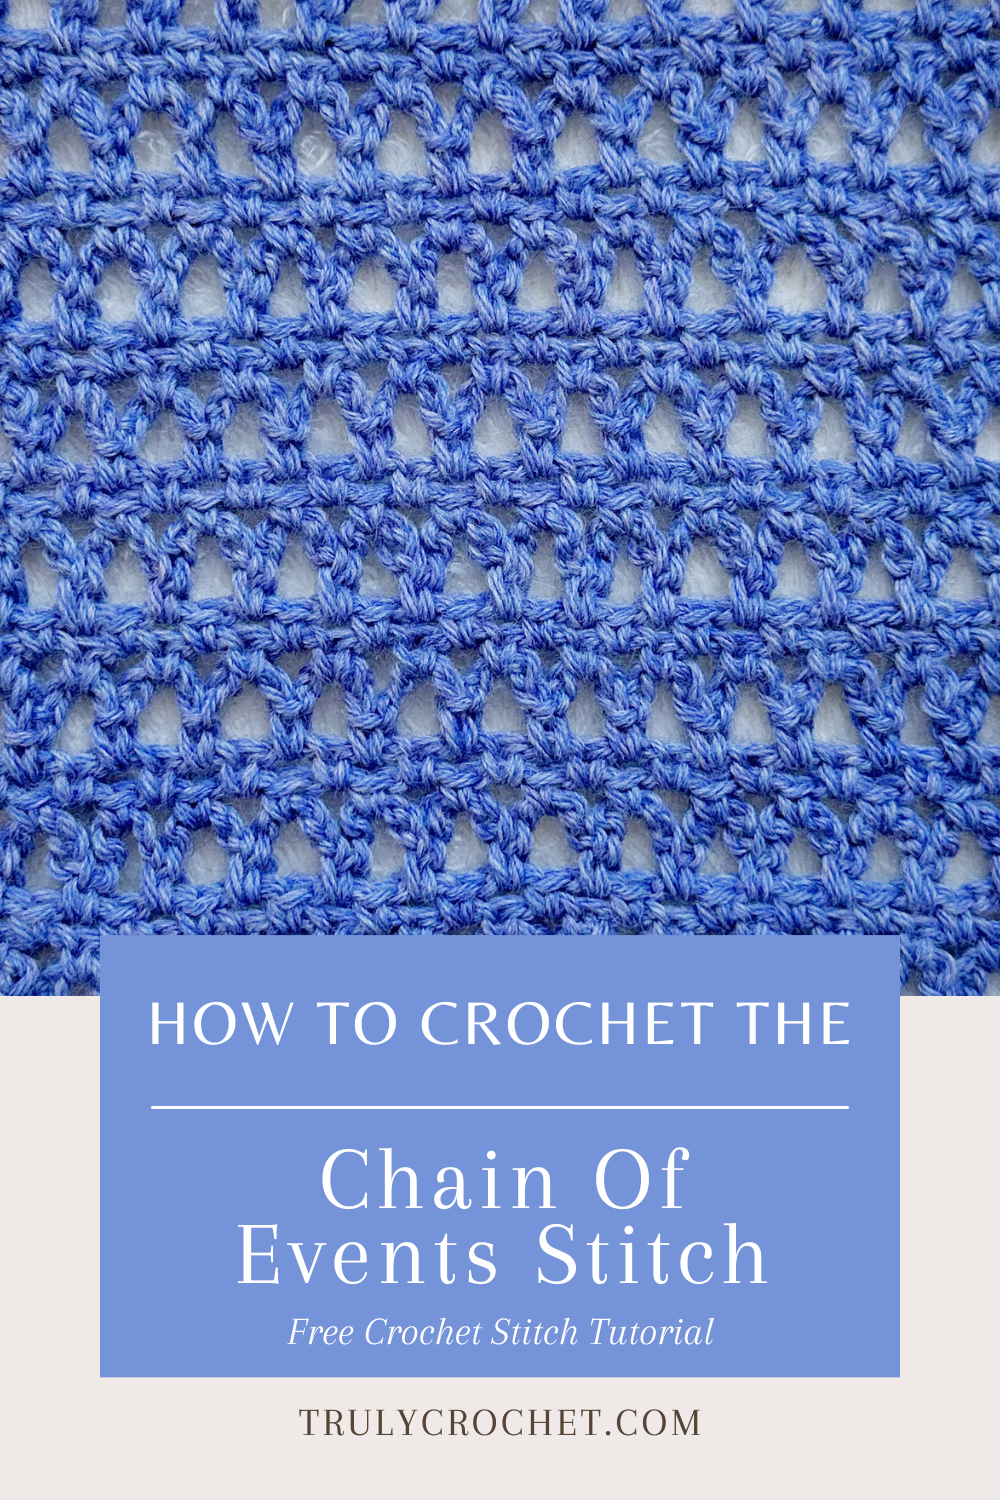 Chain Of Events stitch tutorial